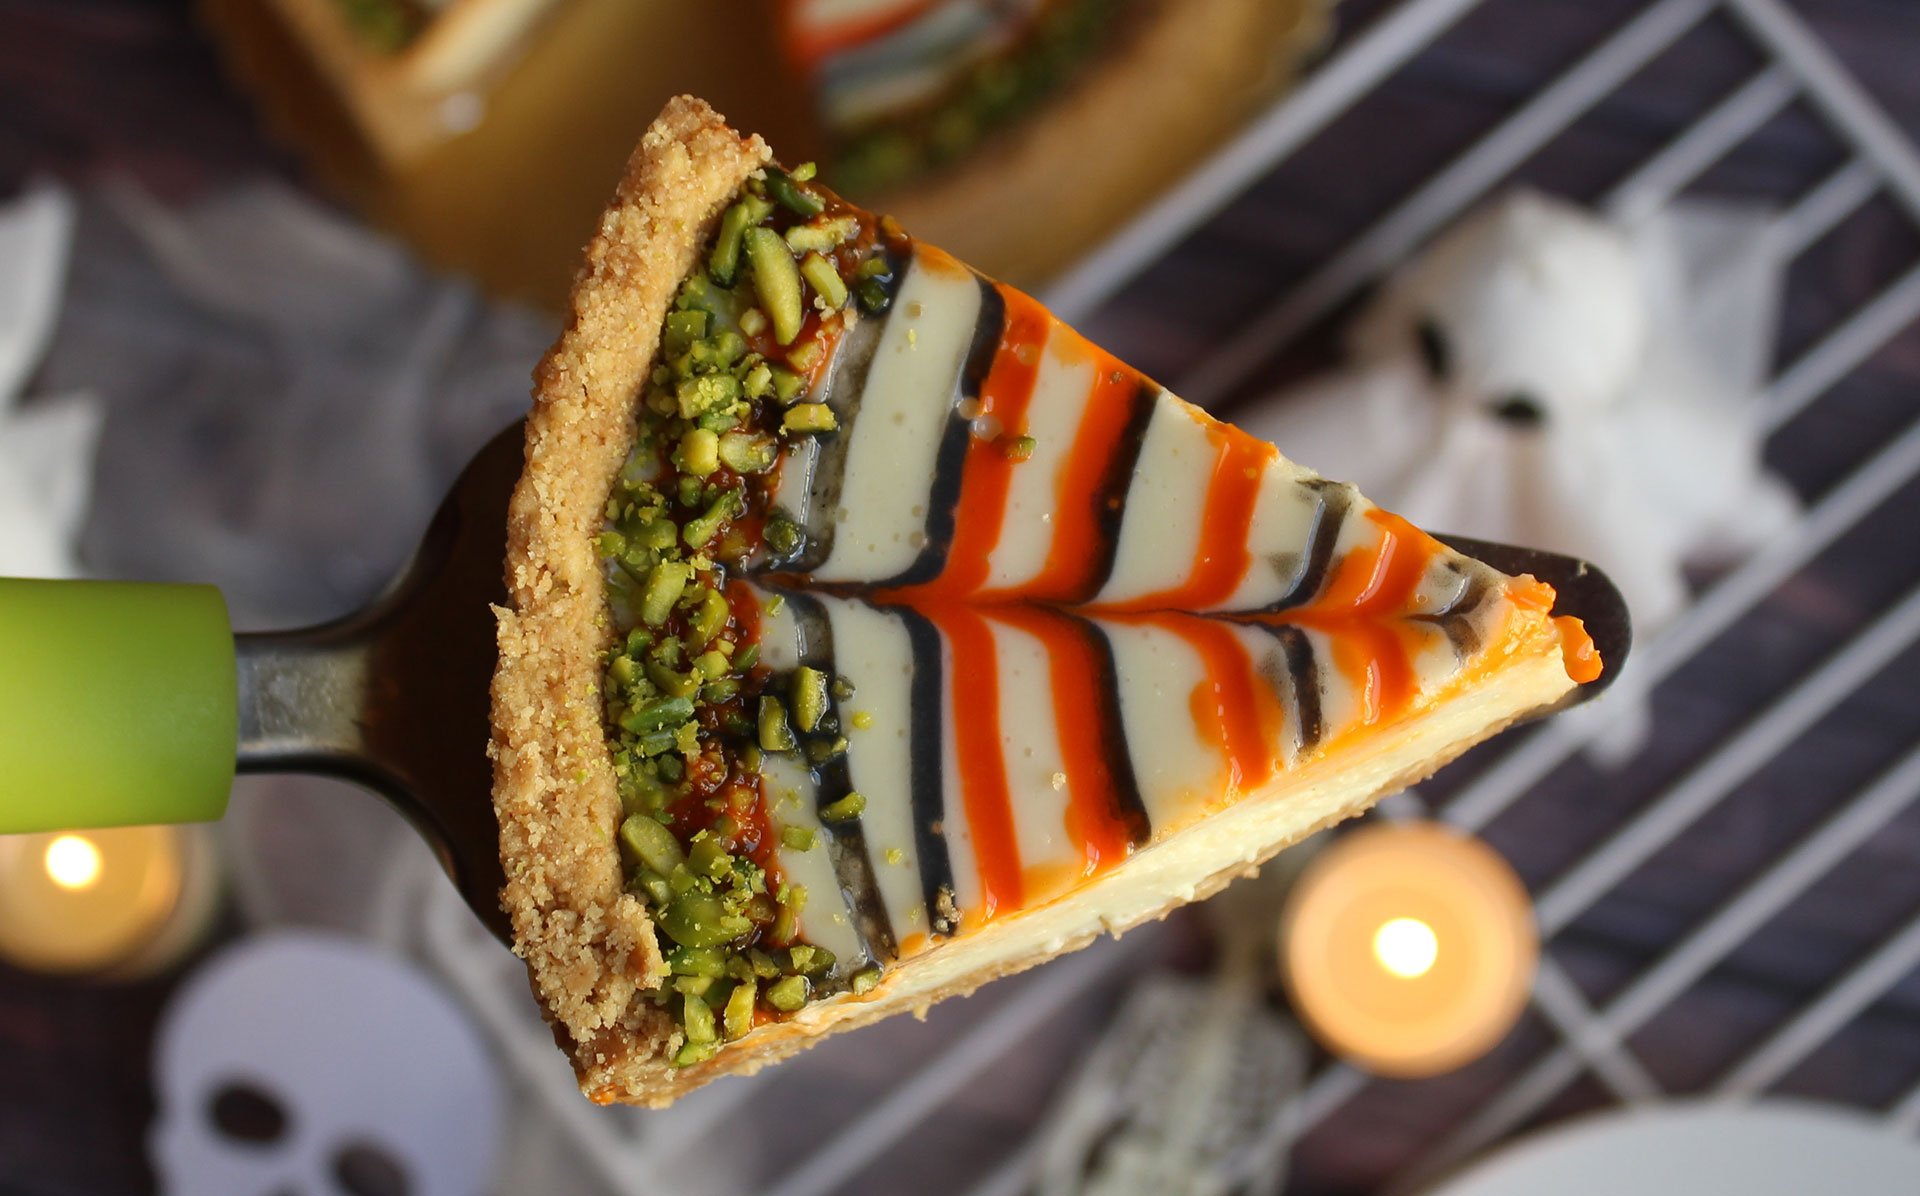 Halloween themed pie for a party - Merry to be Scary, The Horton Building, Nashville